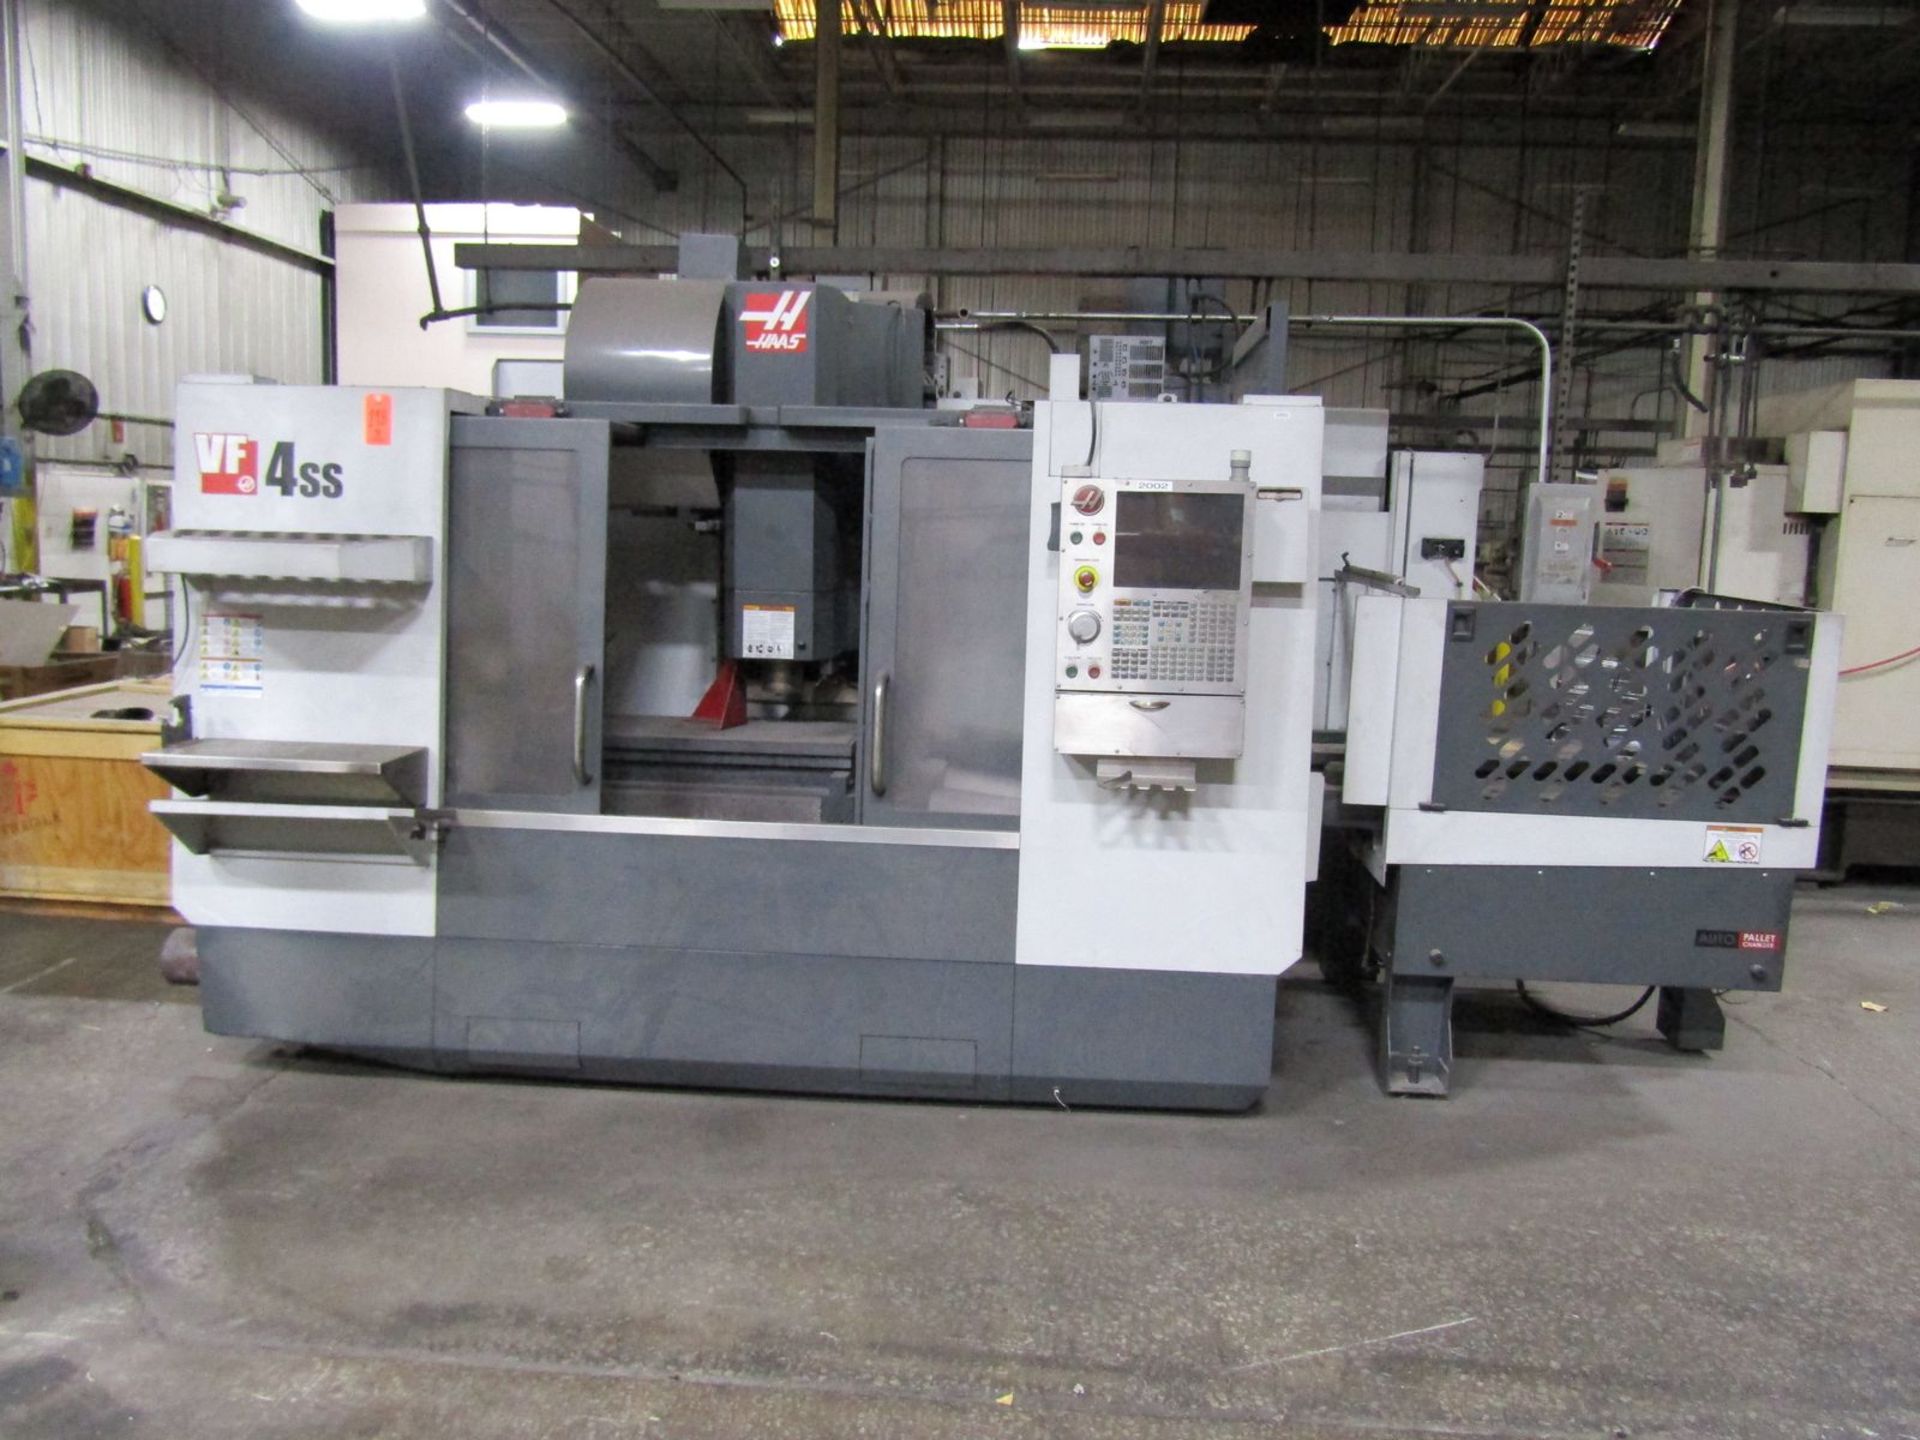 Haas VF-4SSAPC CNC Vertical Machining Center, S/N: 1091757 (2012); with Haas CNC Controls with Hand- - Image 2 of 9